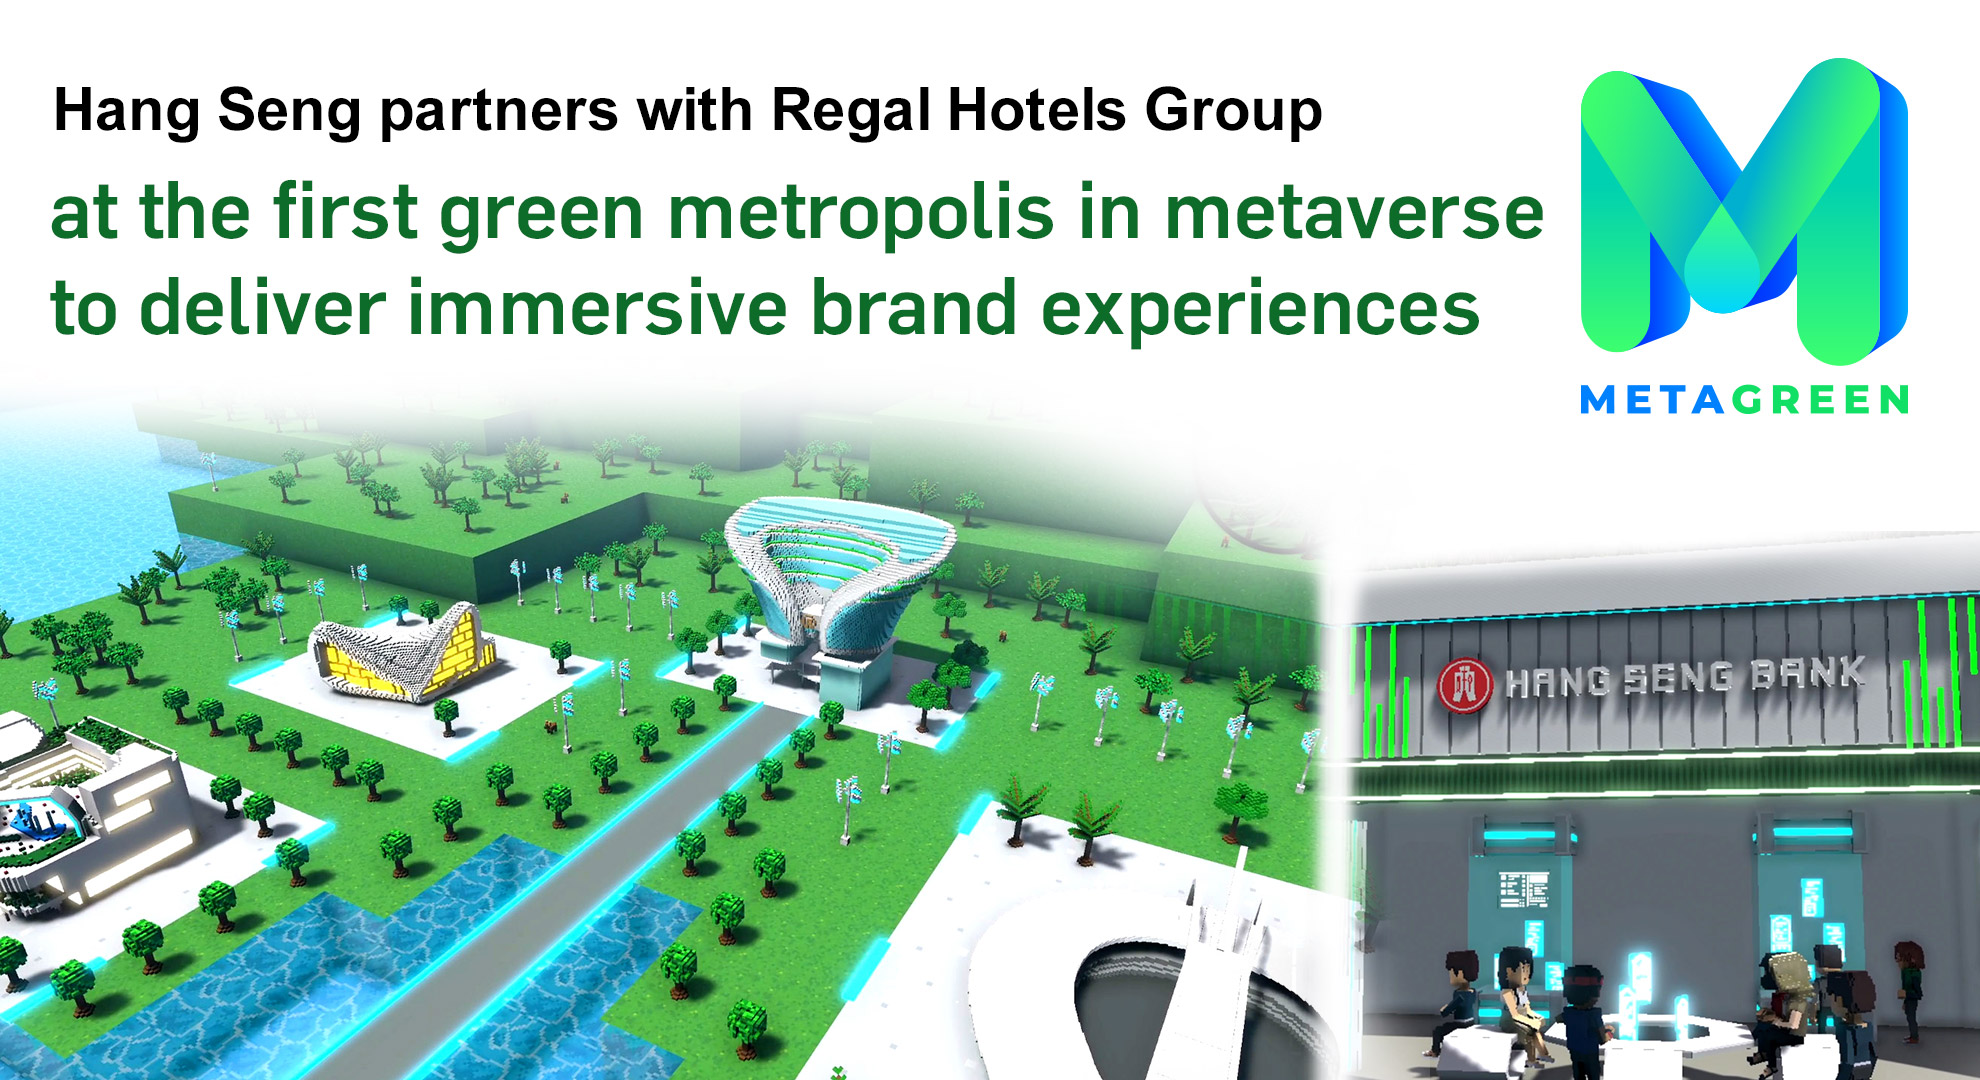 Hang Seng partners with Regal Hotels Group at the first green metropolis in metaverse to deliver immersive brand experiences